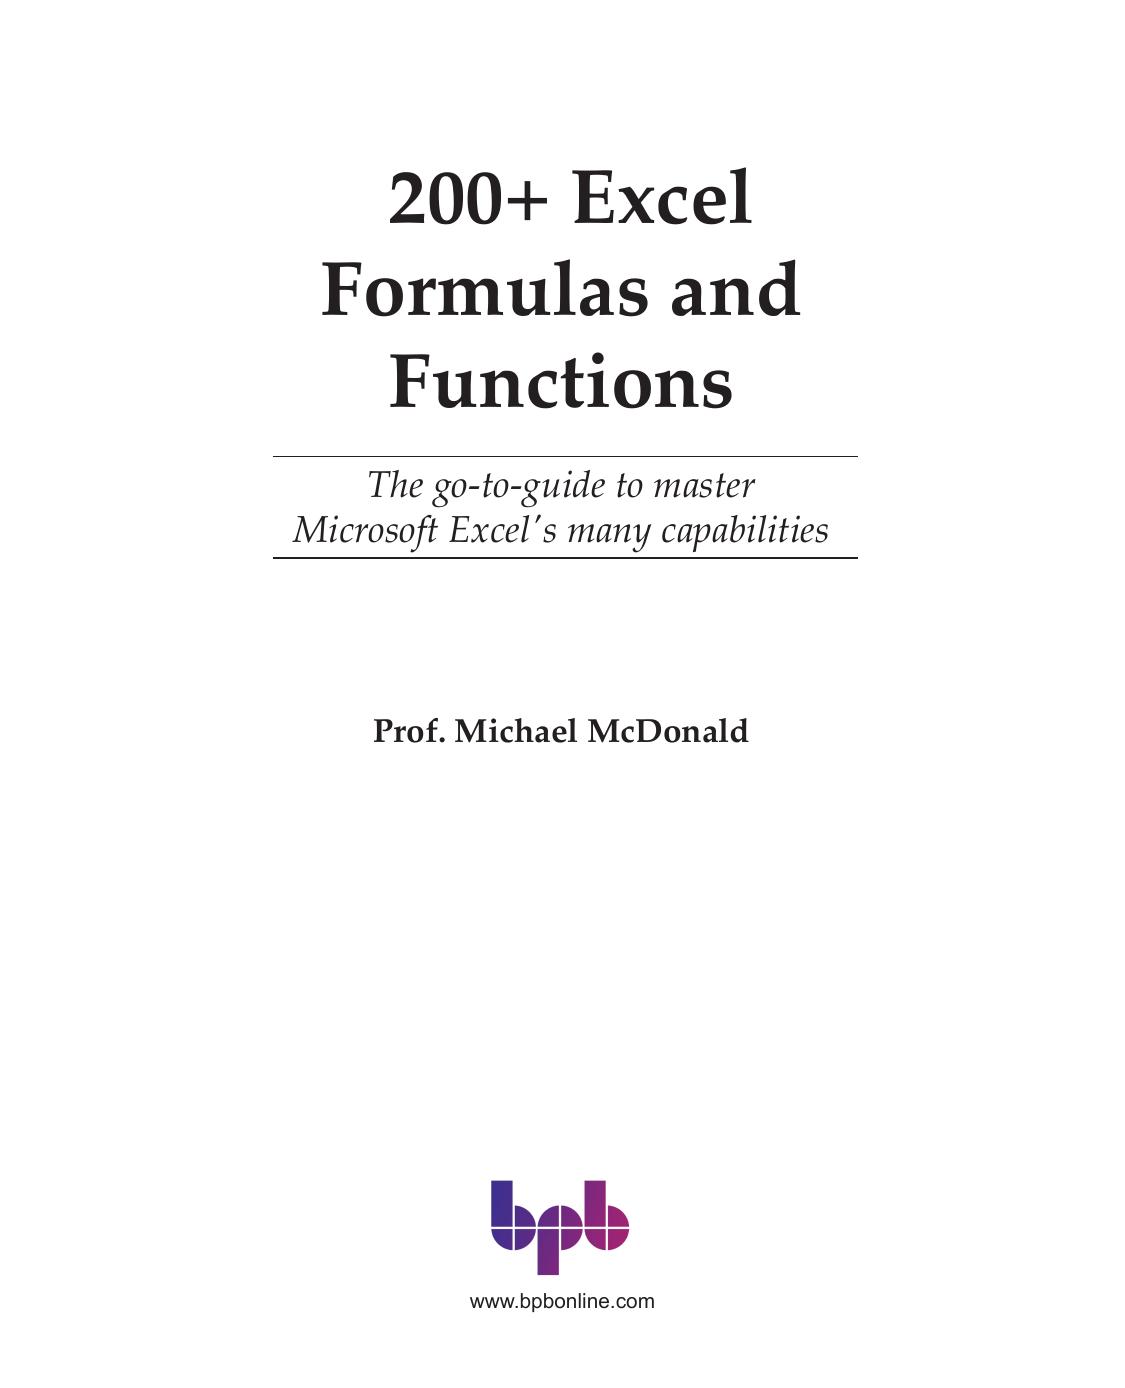 200+ Excel Formulas and Functions: The go-to-guide to master Microsoft Excel's many capabilities (English Edition) by Prof. Michael McDonald